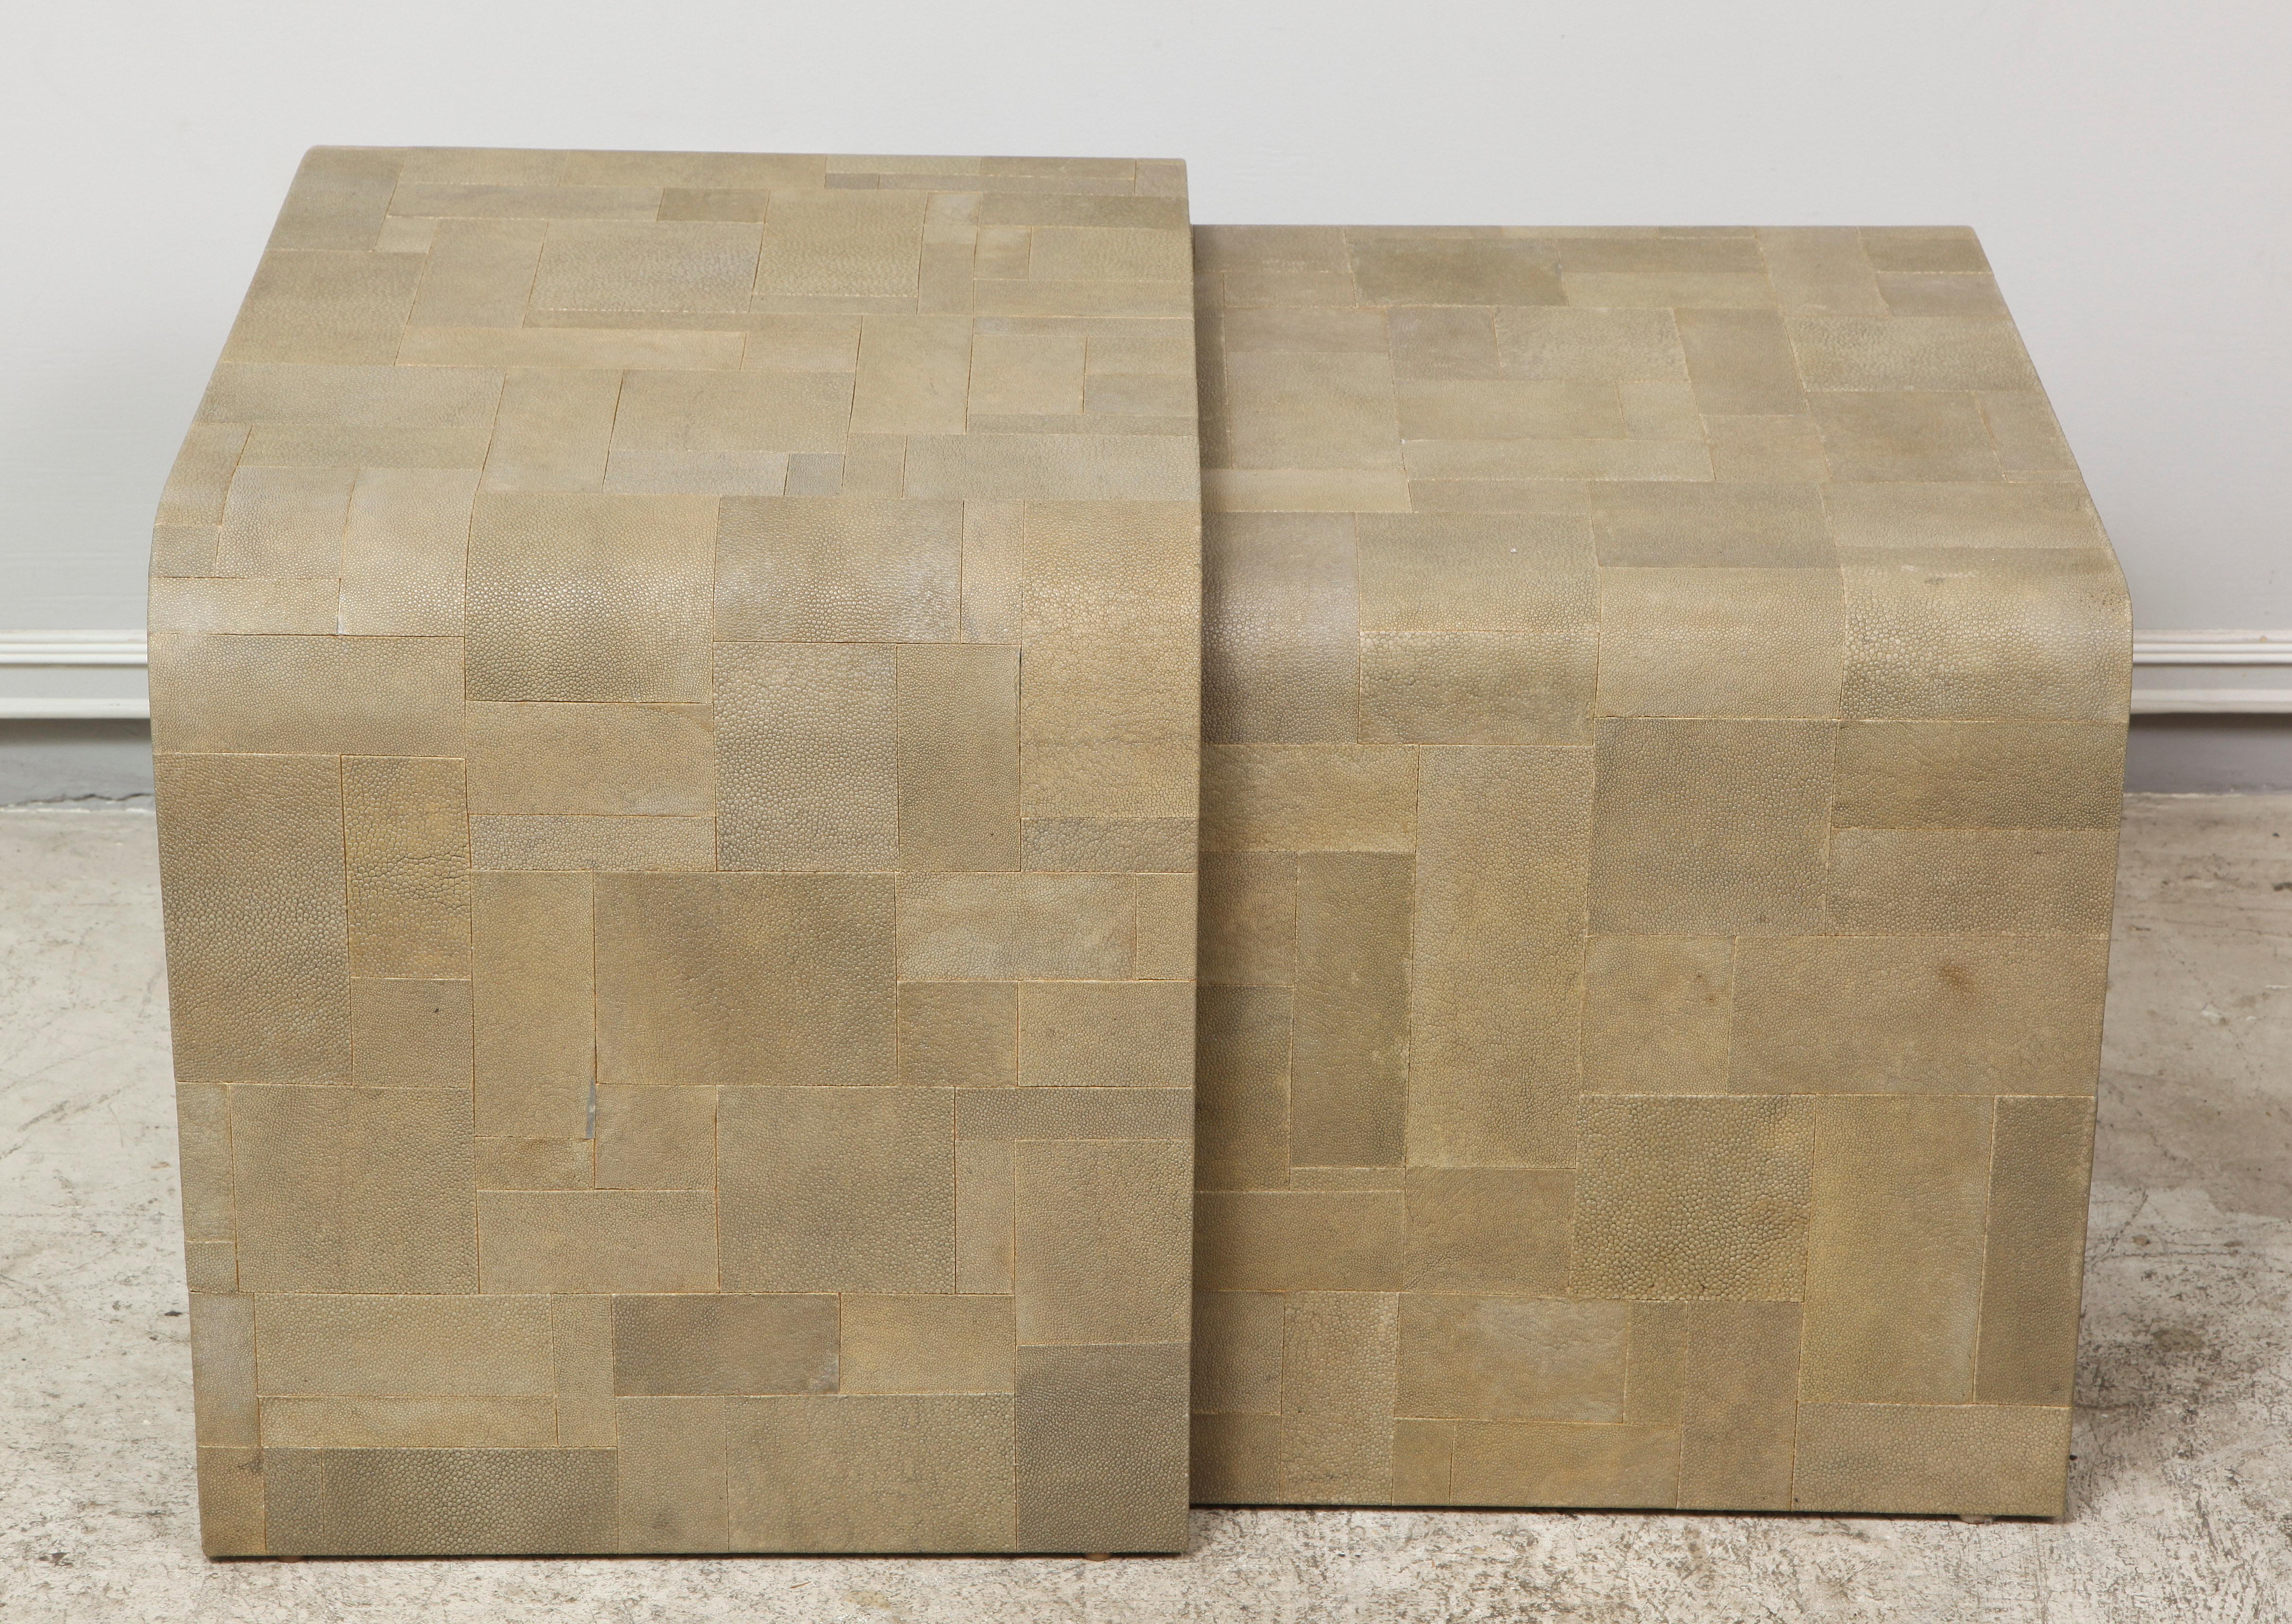 Custom shagreen patchwork nesting tables.
Larger table measures approximately: H 19